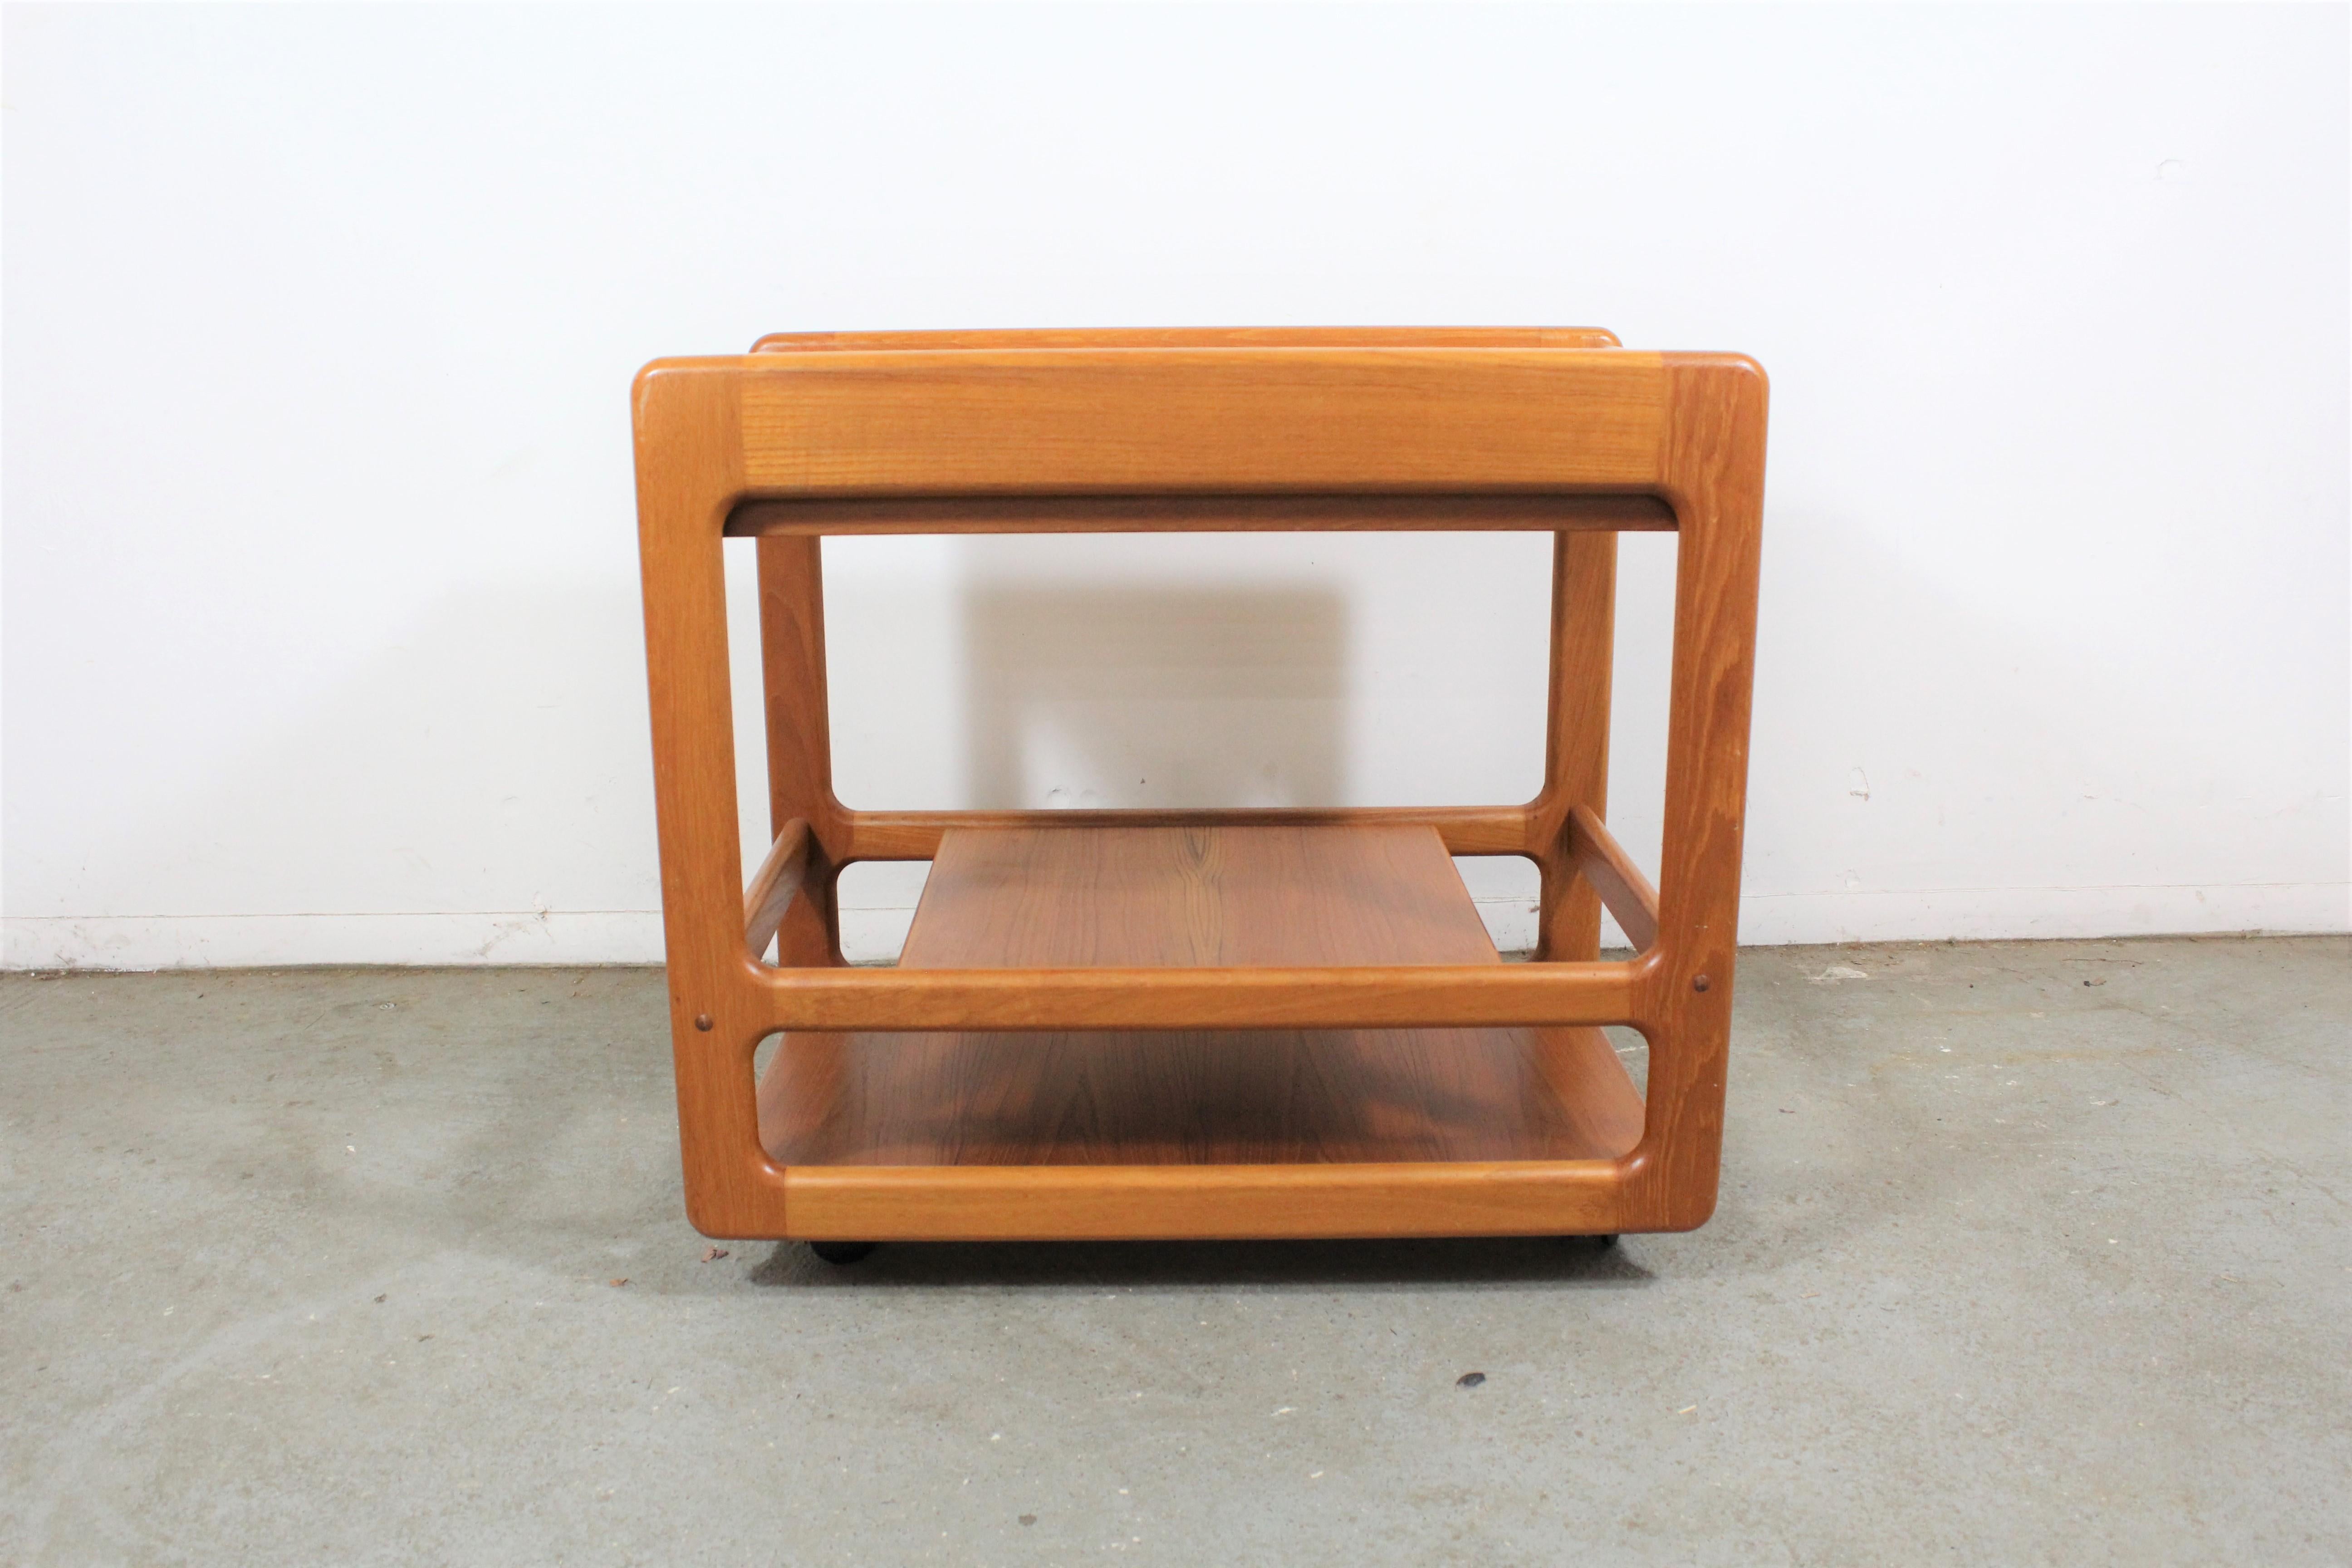 Danish Modern Teak Sliding Door Bar Cart

What a find. Offered is a vintage Danish modern bar cart on wheels. Features 2 bottom with compartments. Great for storage, serving drinks, or food. It is in very good vintage condition, showing some age